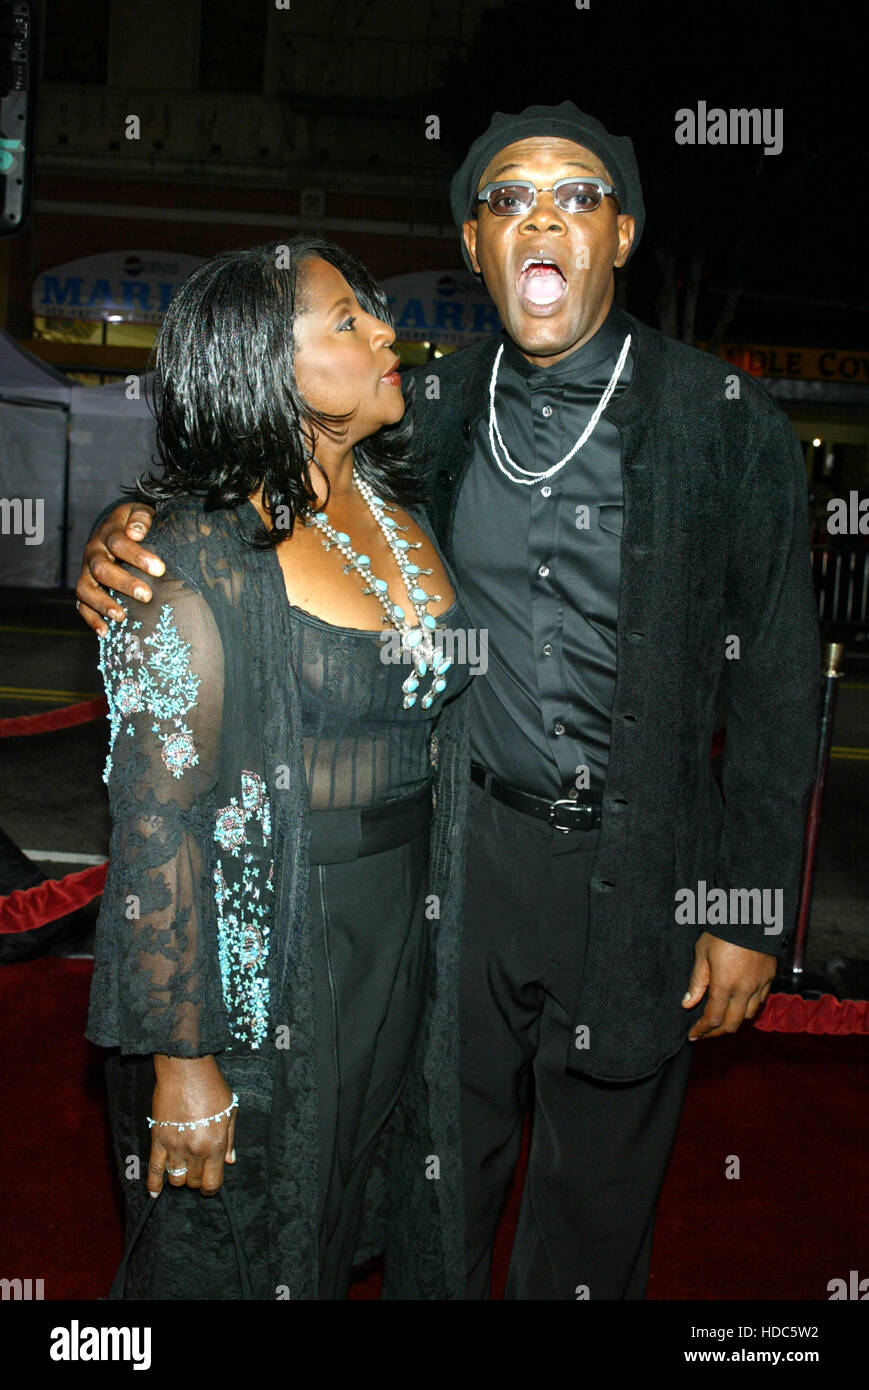 FBS05 20030917 HOLLYWOOD, UNITED STATES :  Actors Samuel L. Jackson, right, and his wife, LaTanya Richardson share a laugh during the movie premiere 'The Fighting Temptations' in Hollywood,  on  Thursday, 17, September 2003. Richardson has a part in the film which was produced by Paramount Pictures and stars Beyonce Knowles and Cuba Gooding, Jr. Photo by Francis Specker Stock Photo